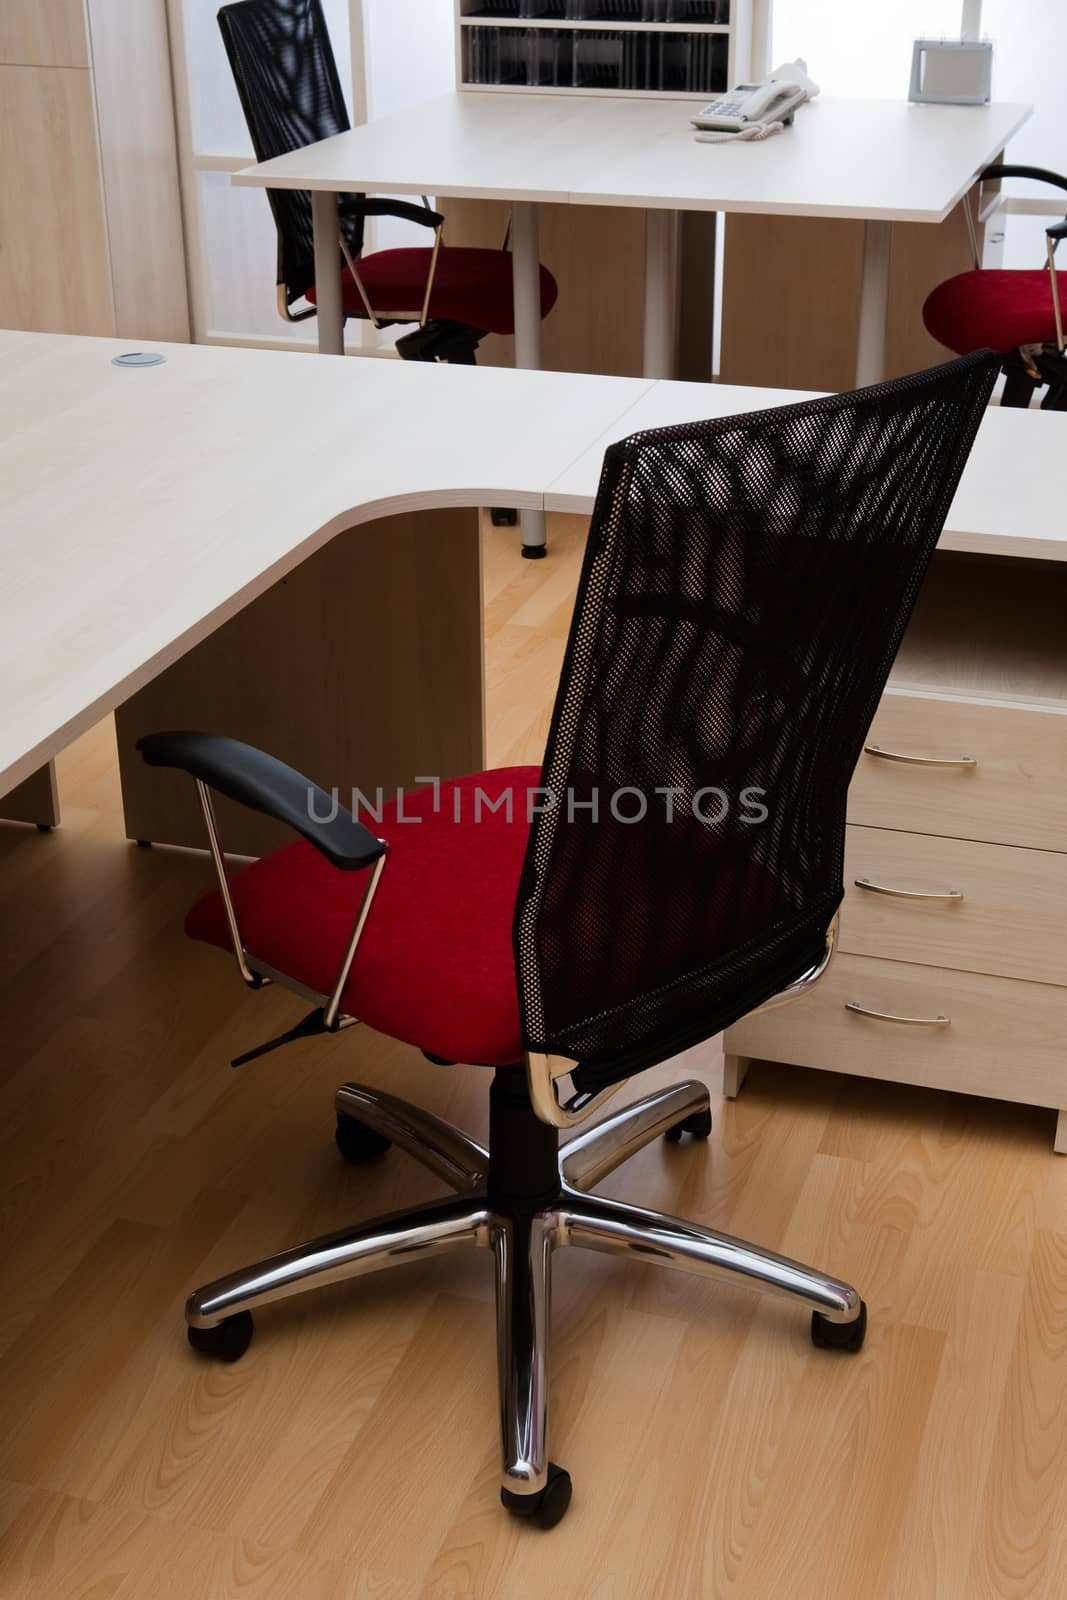 new red chair in a modern office